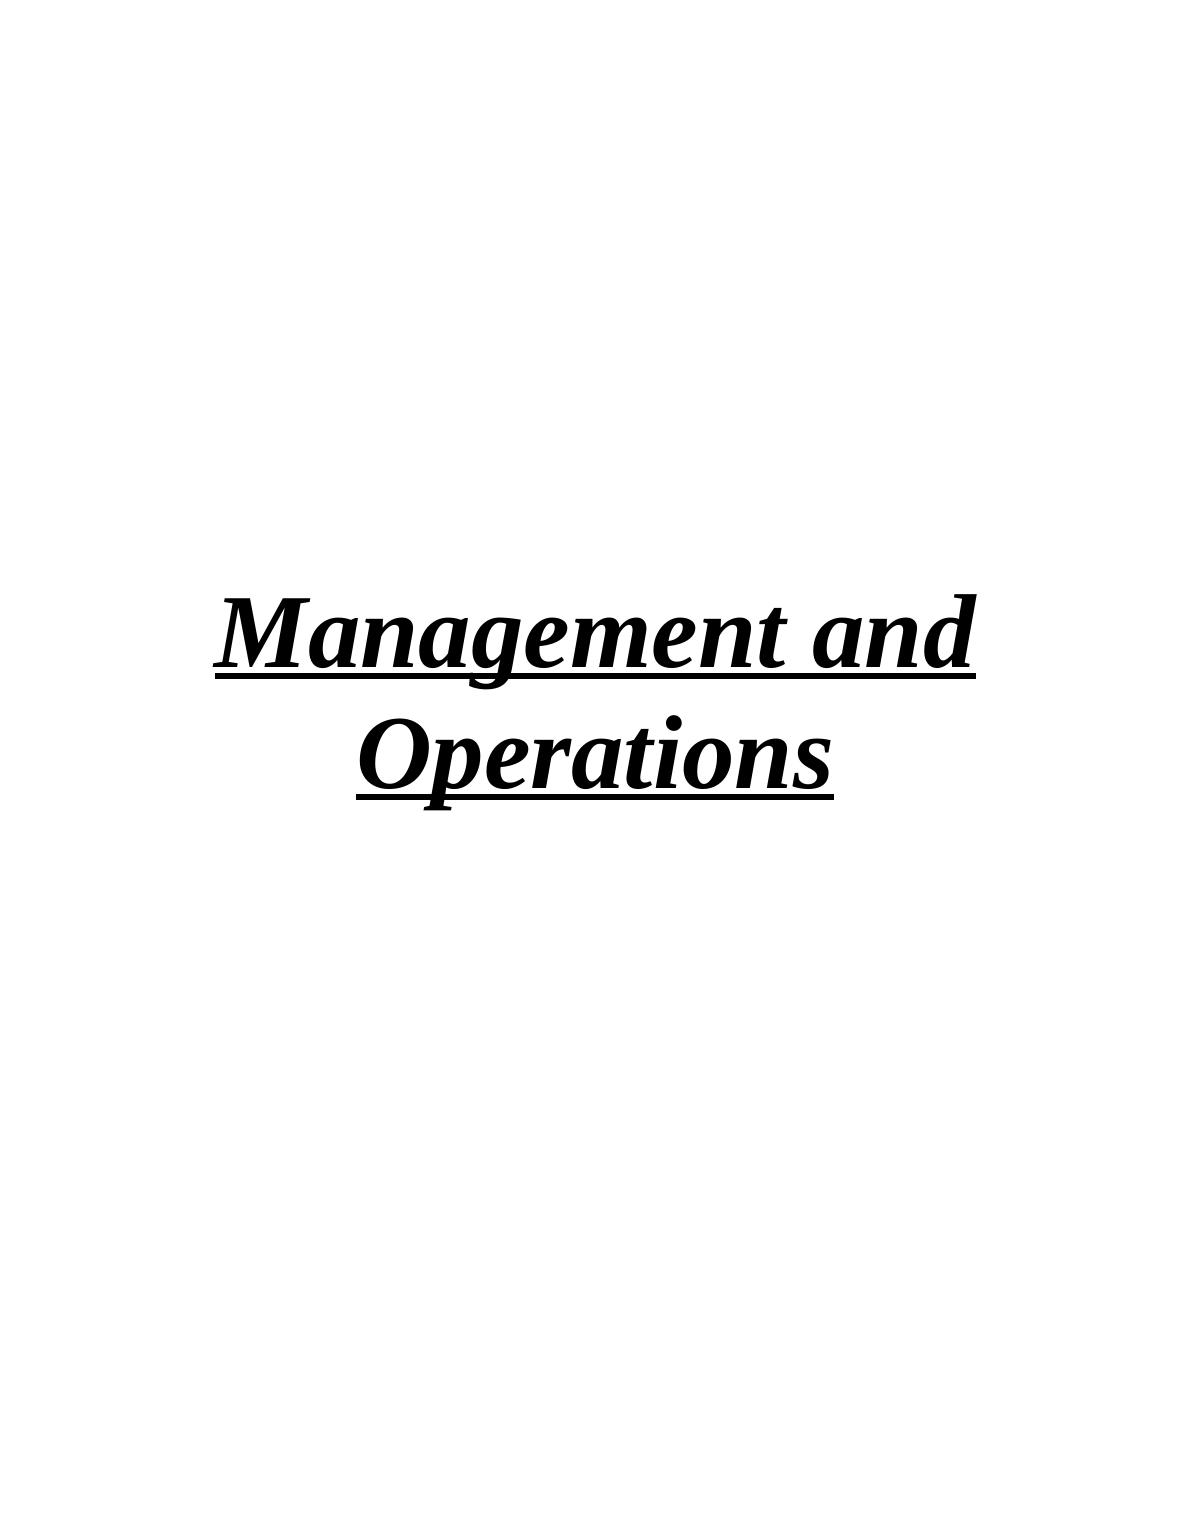 Management and Operations Assignment - TESCO multinational company_1